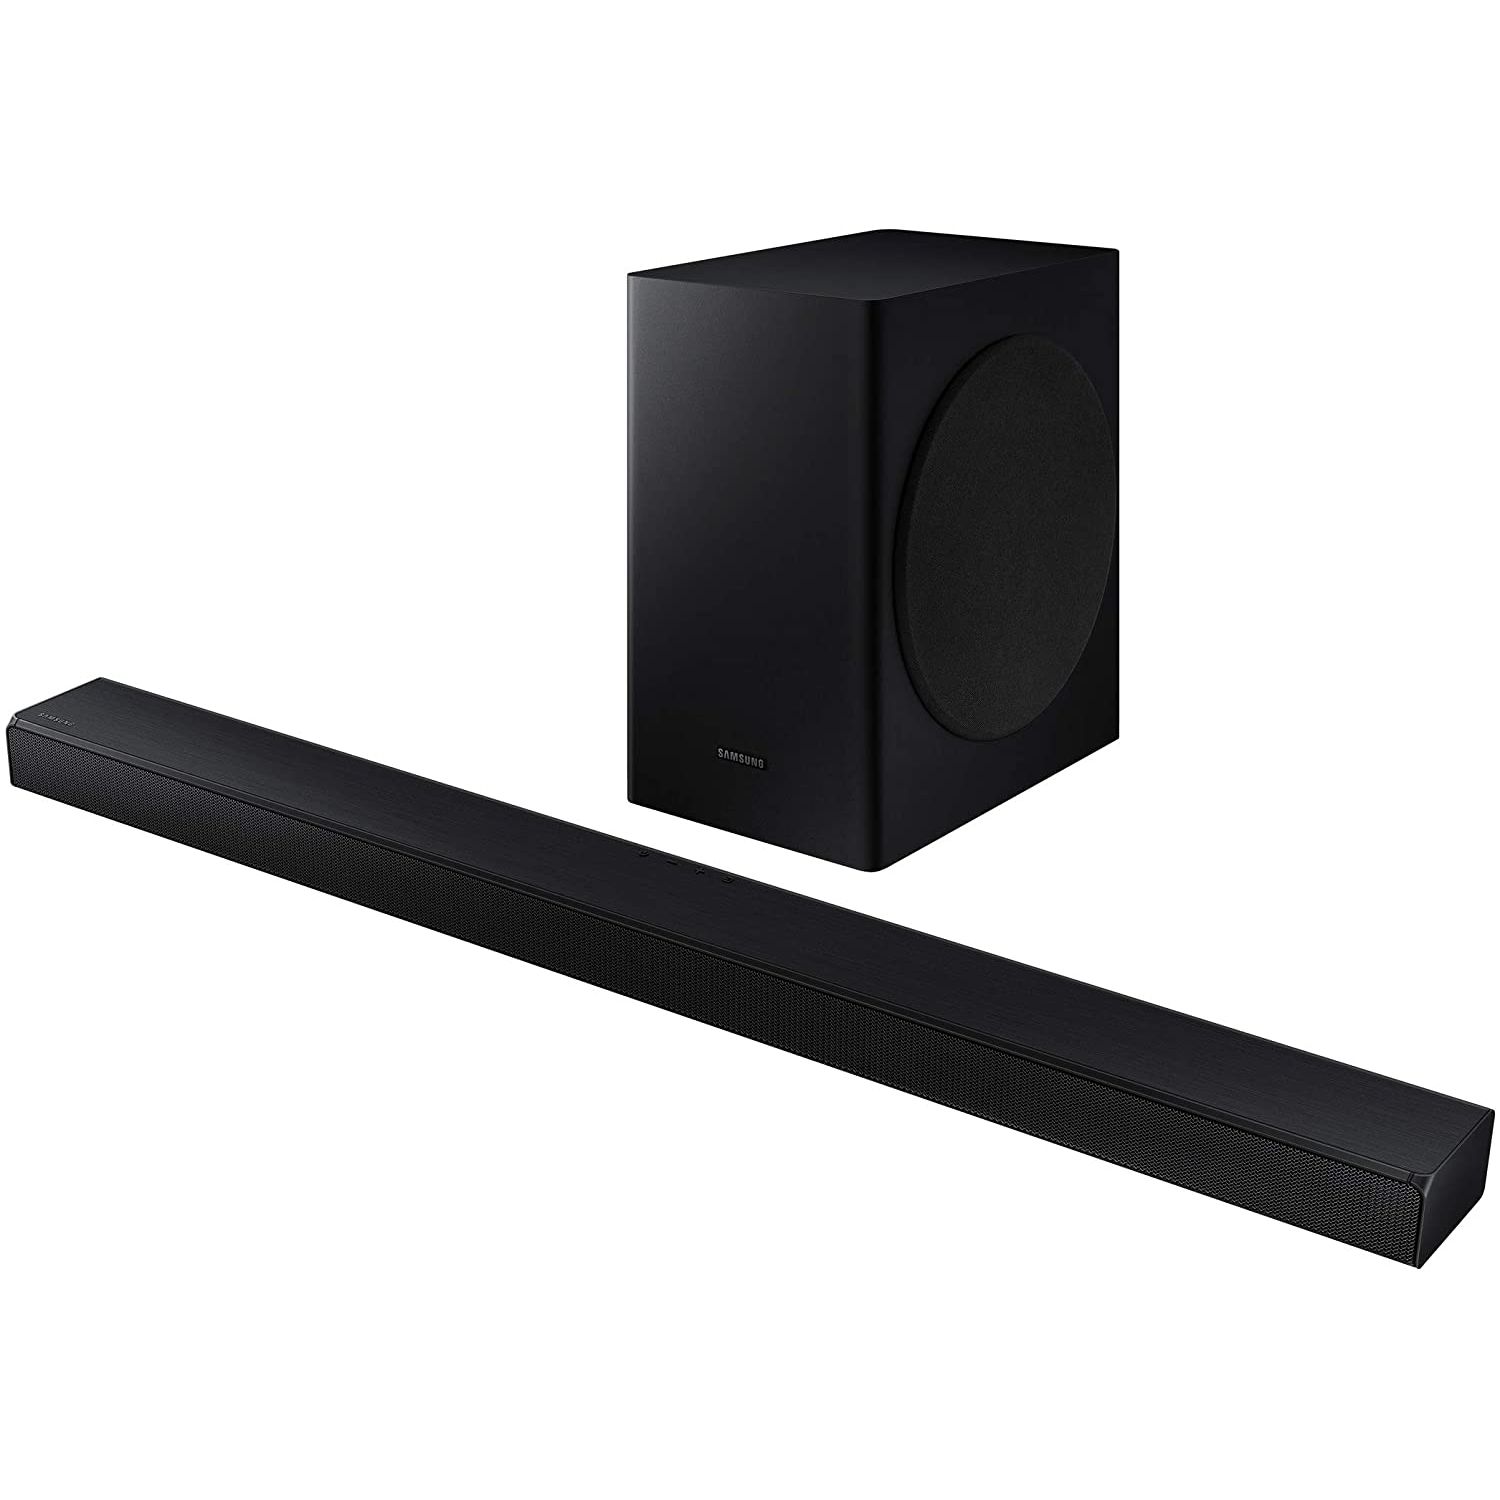 Samsung HW-T650 Soundbar with Dolby Audio and DTS Virtual X 3D Surround Sound